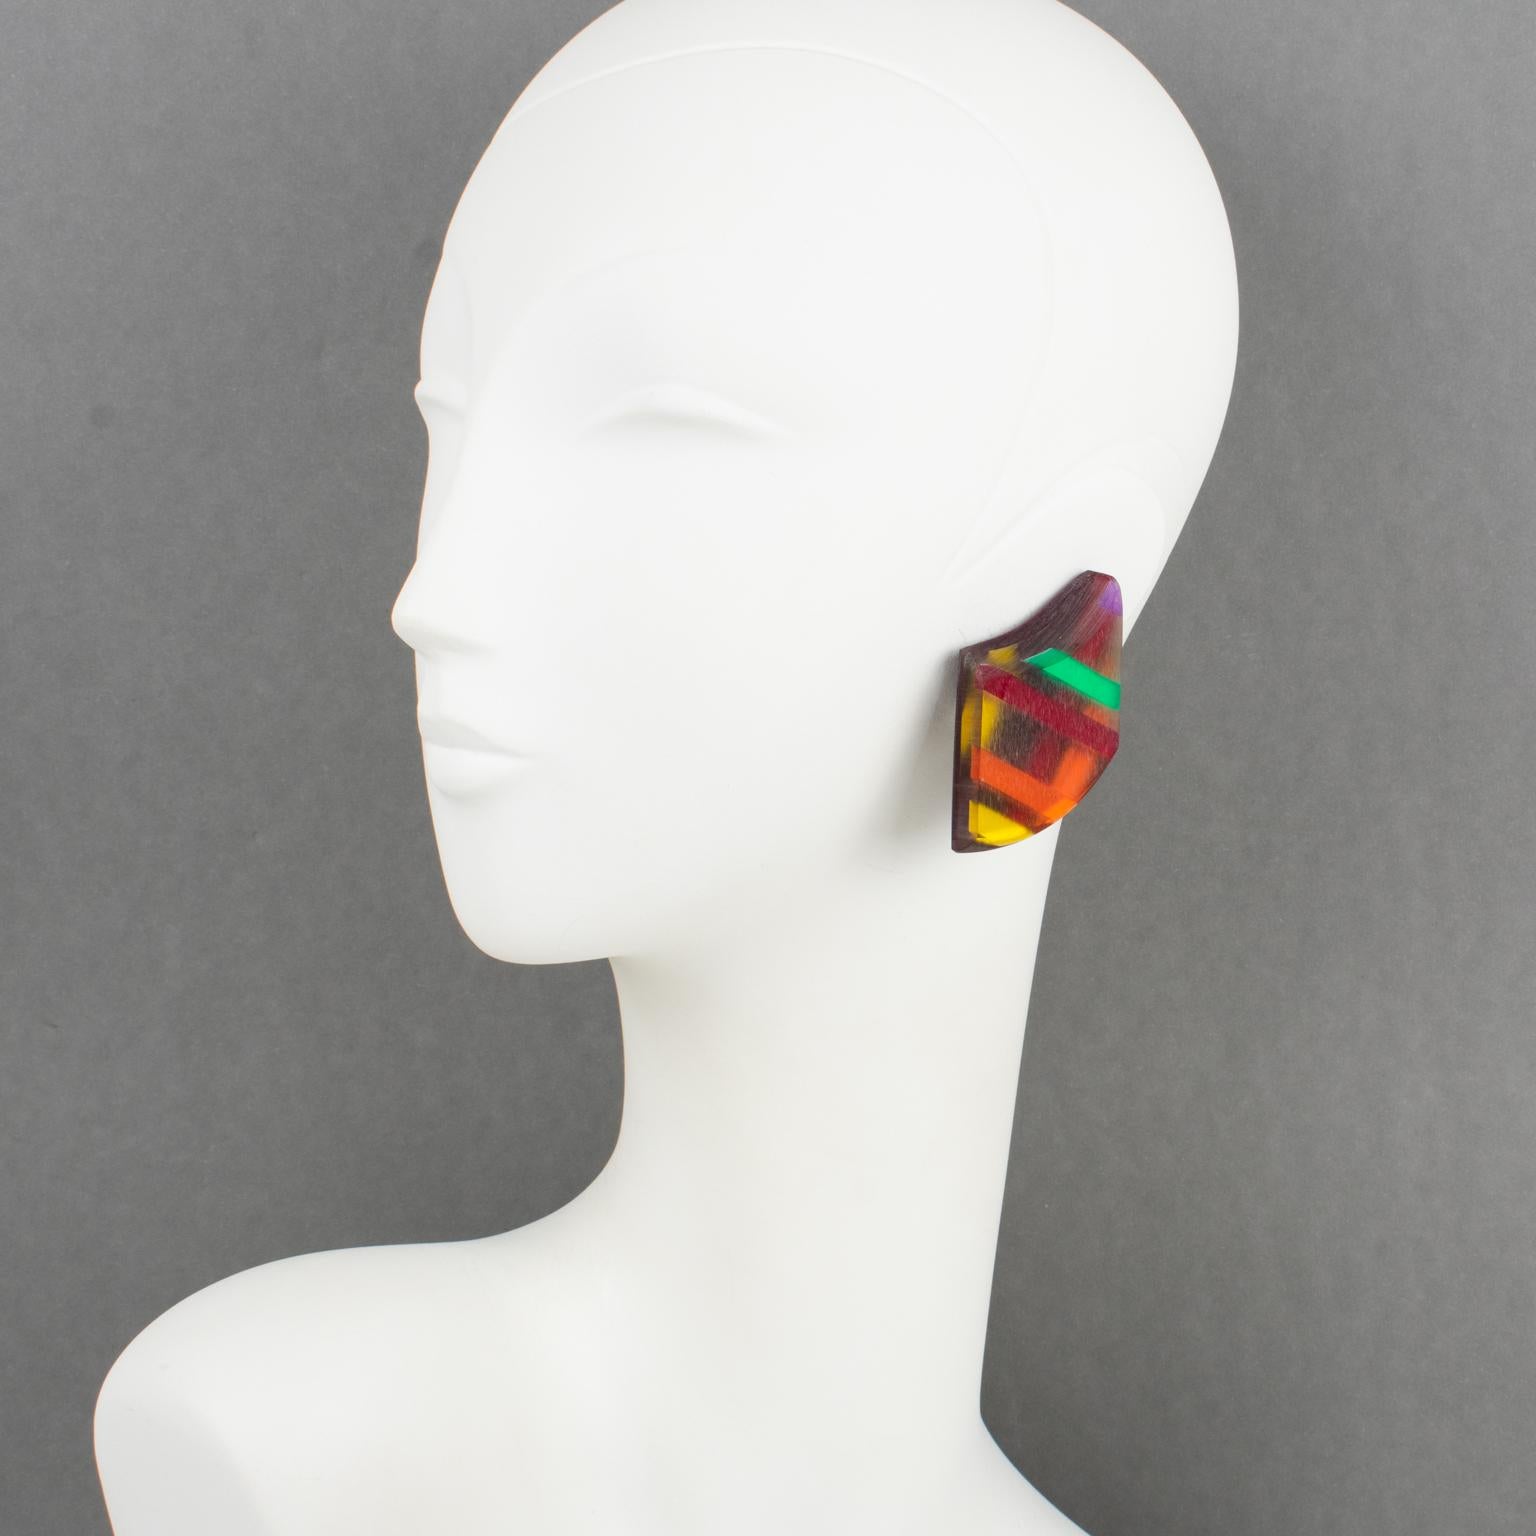 Harriet Bauknight for Kaso designed these colorful geometric Lucite clip-on earrings. They feature a massive asymmetric shape with a graphic design built with dimensional multilayers of Lucite and colorful harlequin inclusions and assorted bright